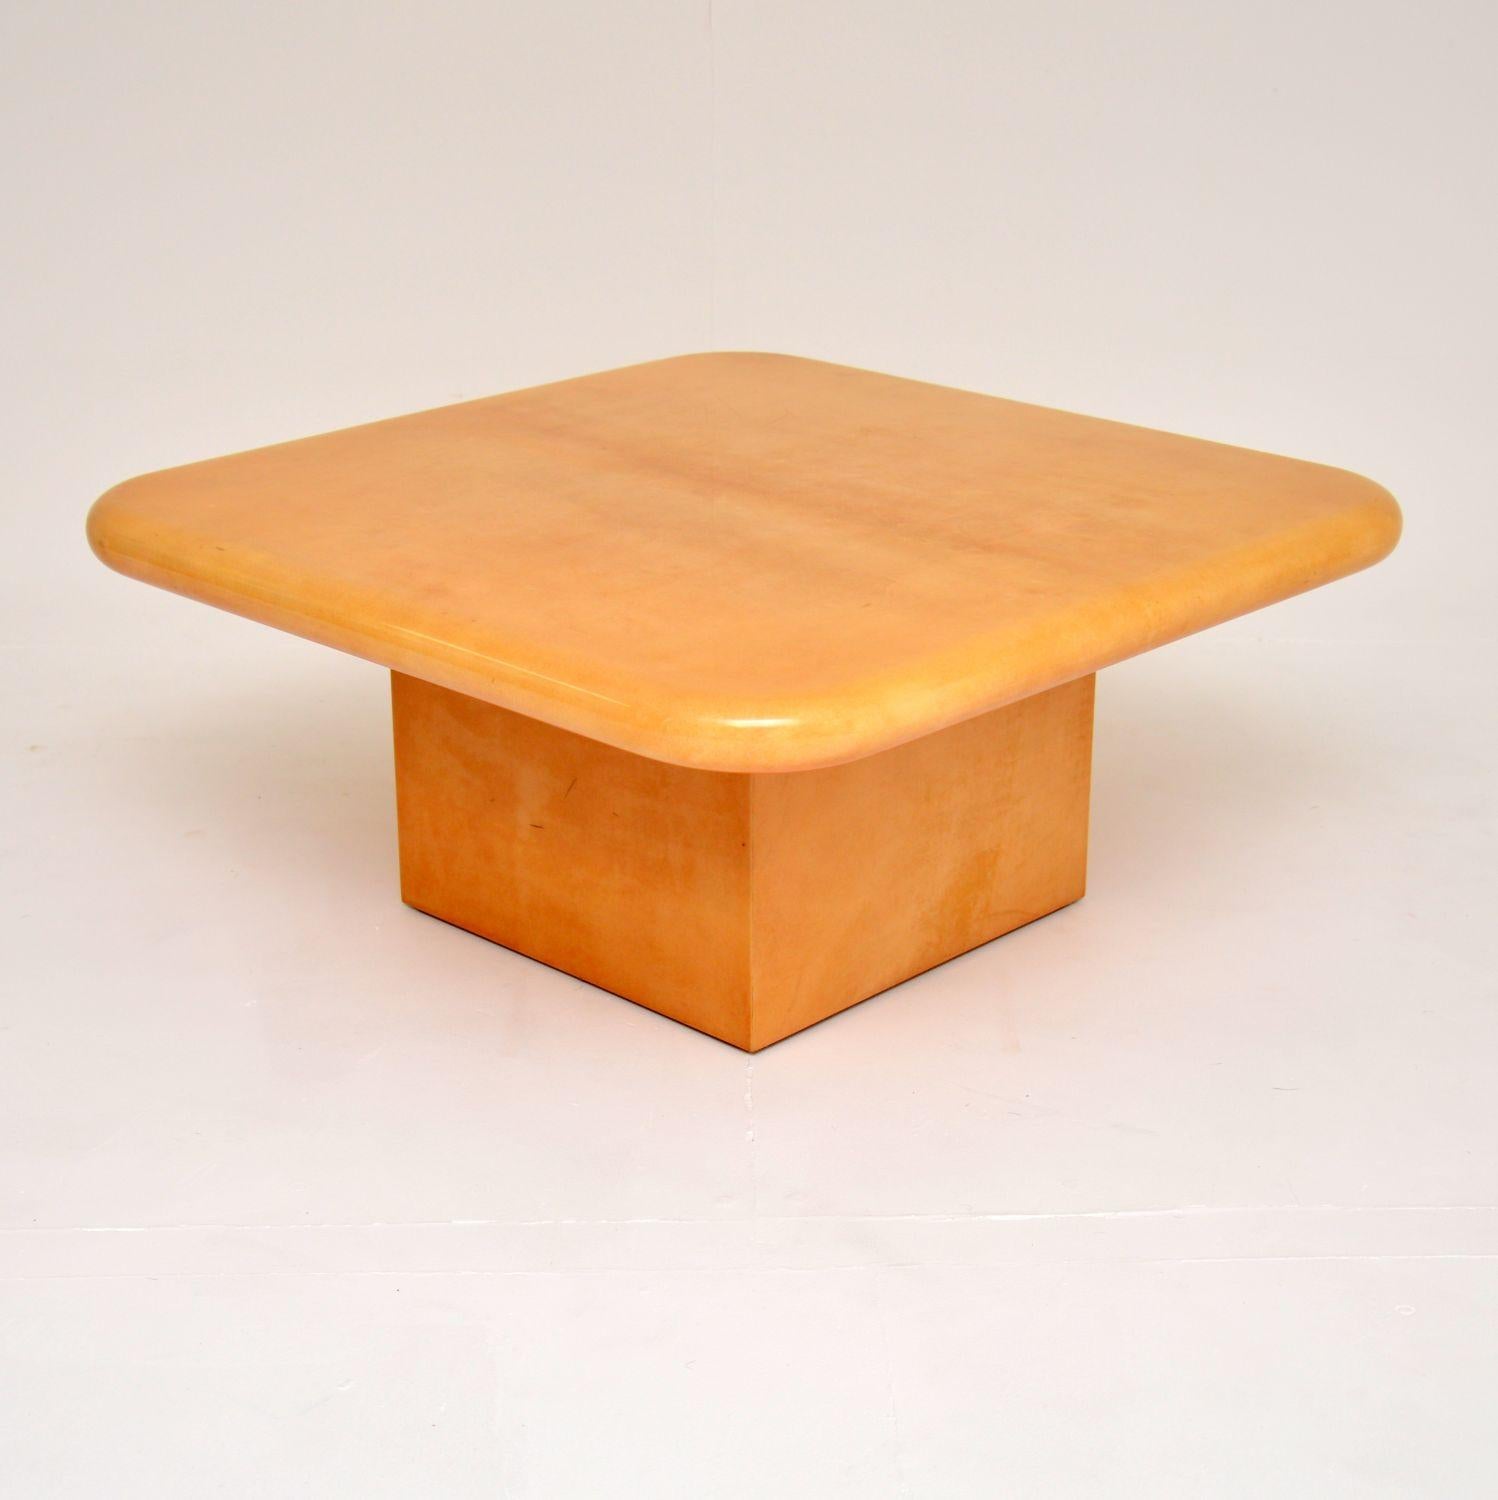 A stunning original vintage Aldo Tura coffee table in lacquered goatskin parchment. This was made made in Italy, it dates from the 1970’s. It is a useful size, and the quality as with all Aldo Tura designs is excellent. With thick edges, it sits on